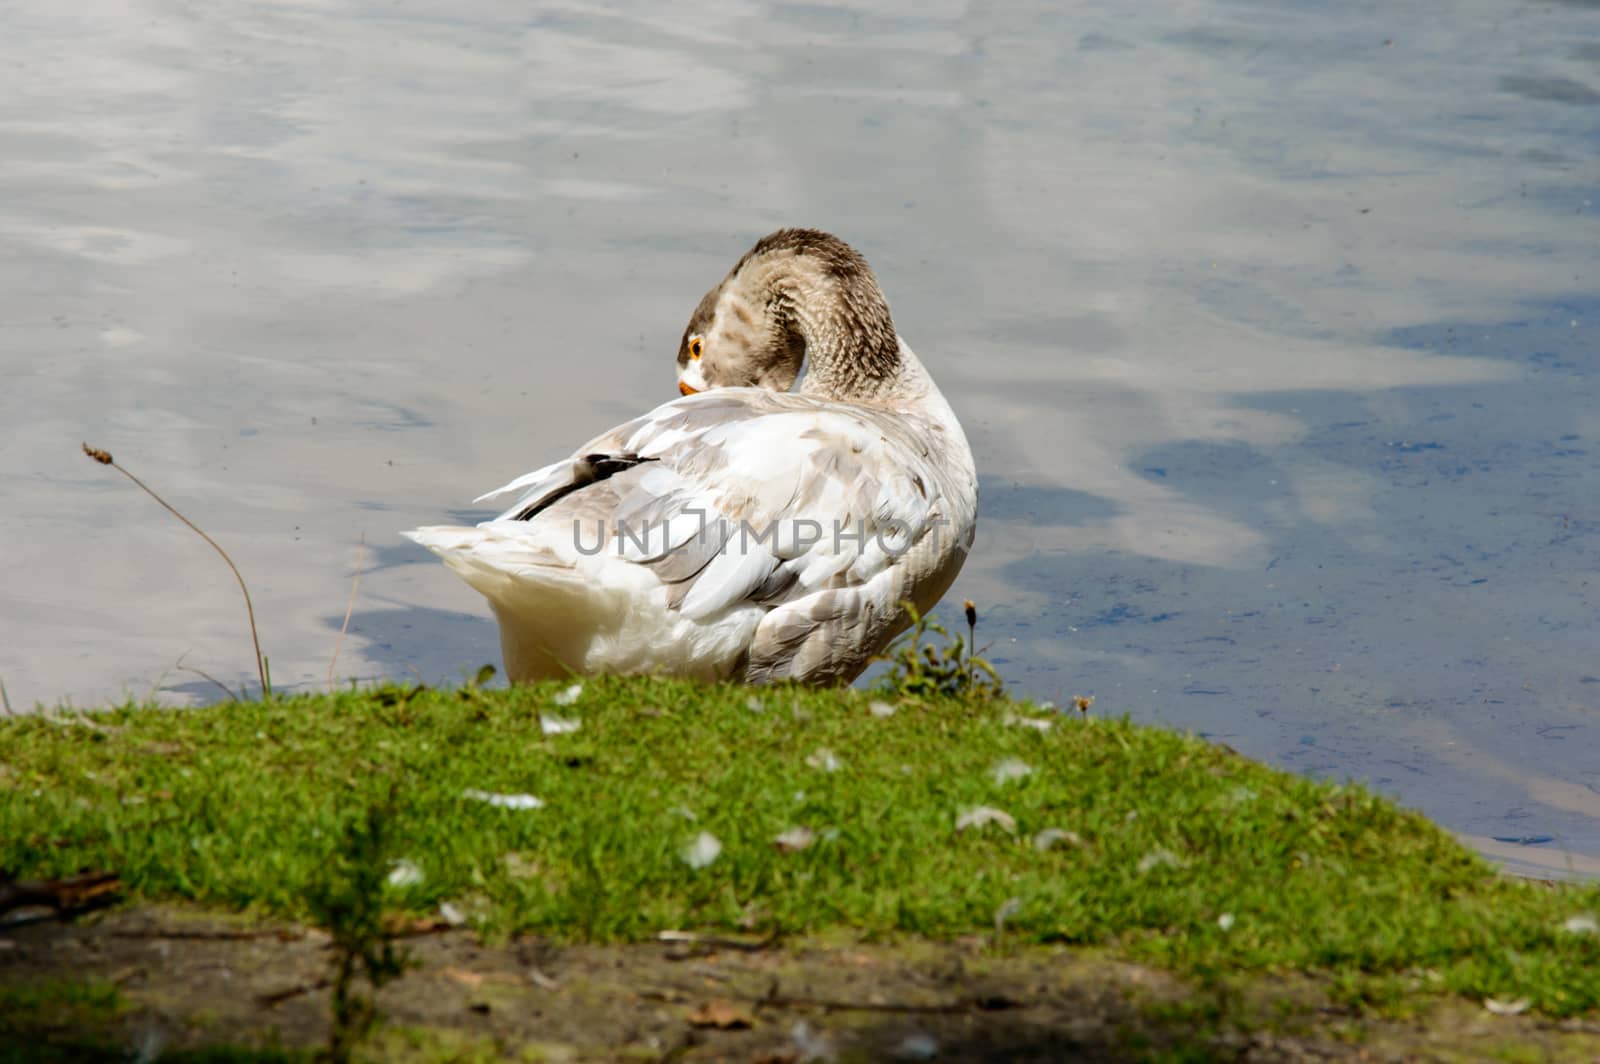 Beautiful white and gray goose preening himself while standing on grassy knoll near calm pond water